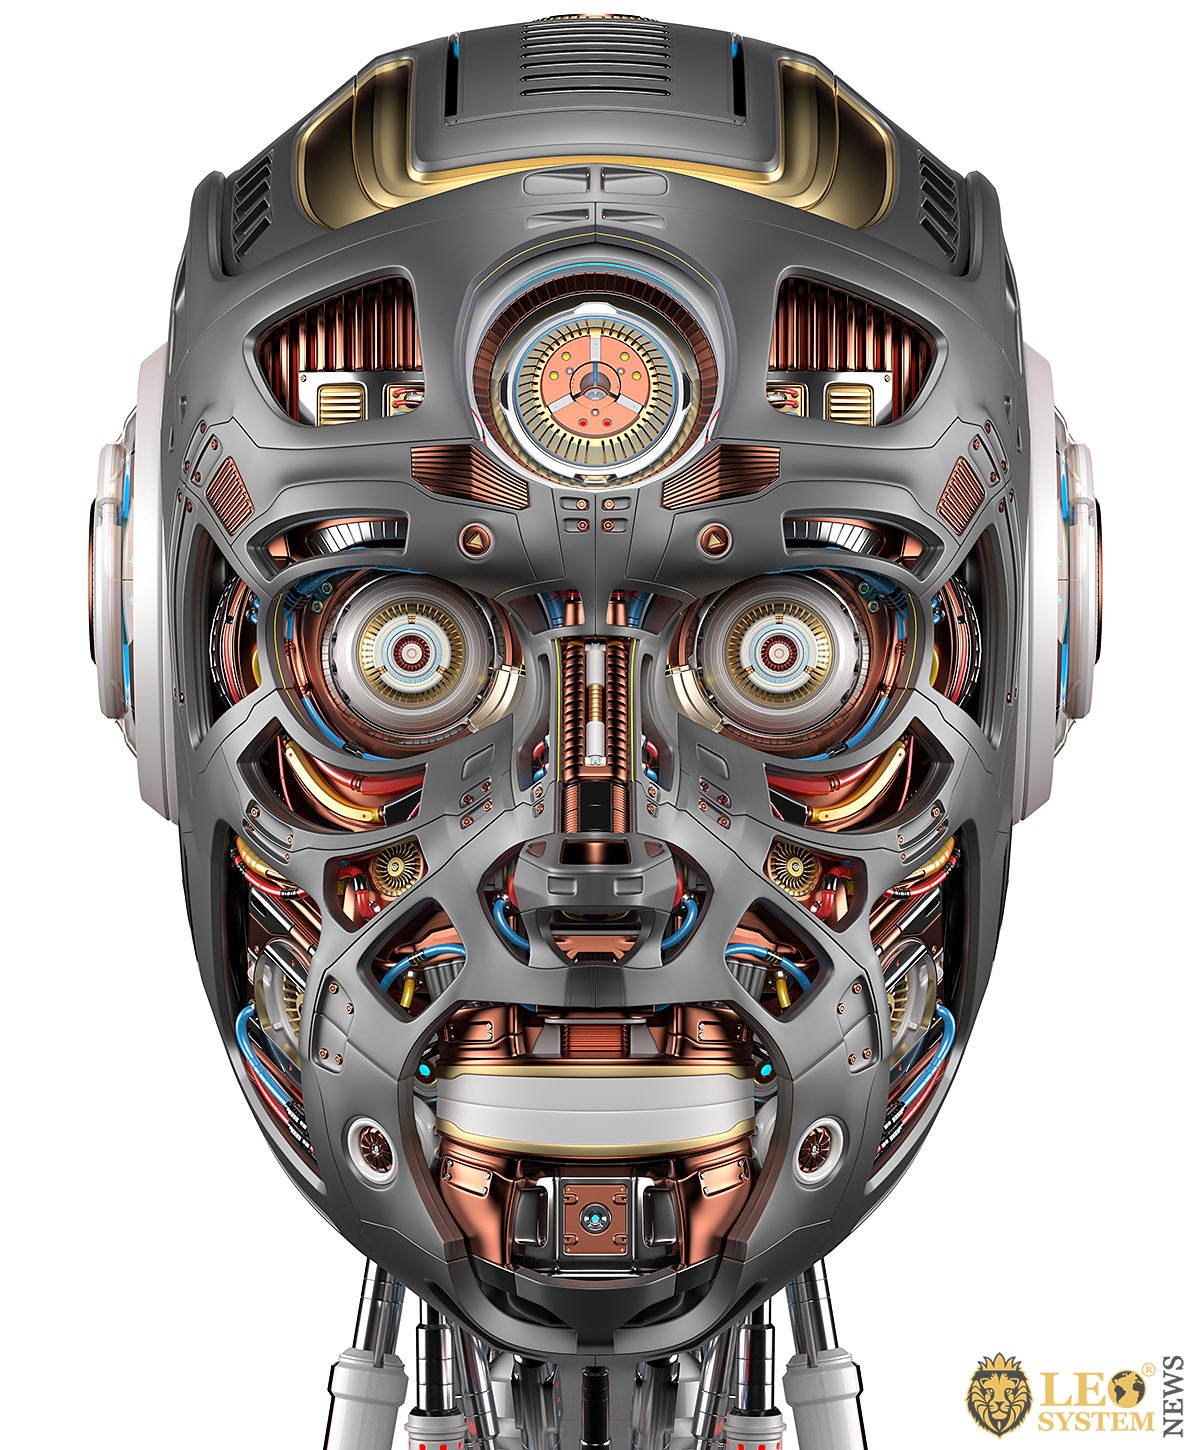 Image of the head of a humanoid robot